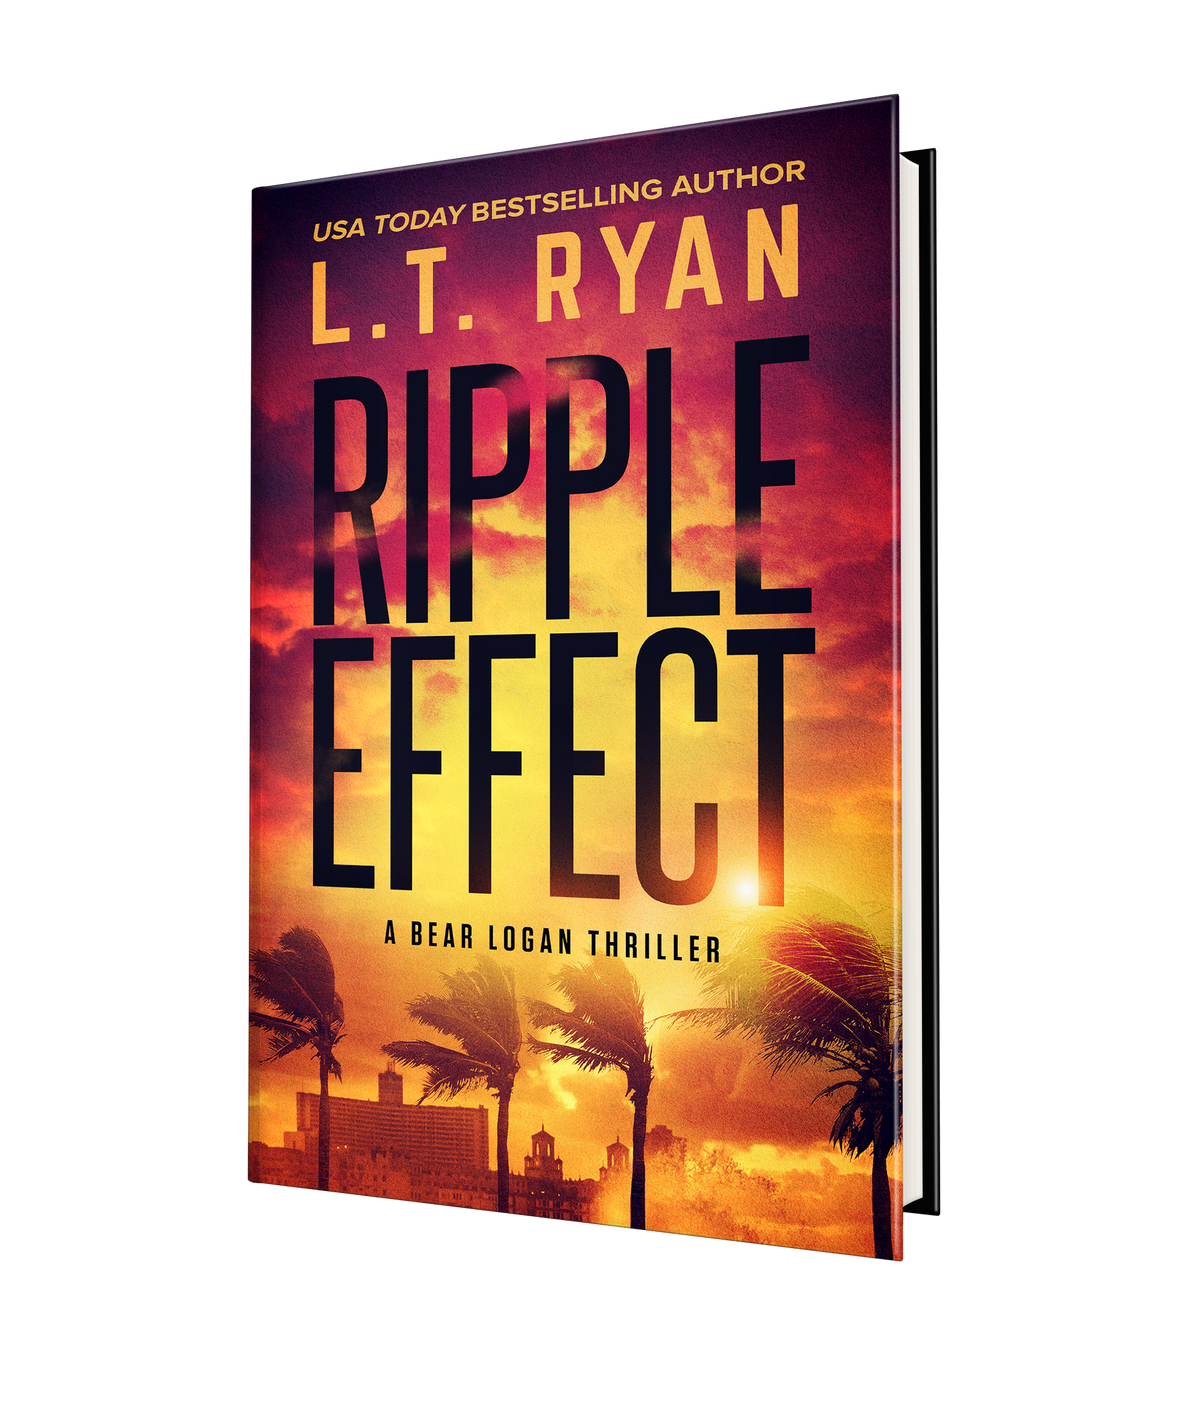 Ripple Effect: Signed by the Author